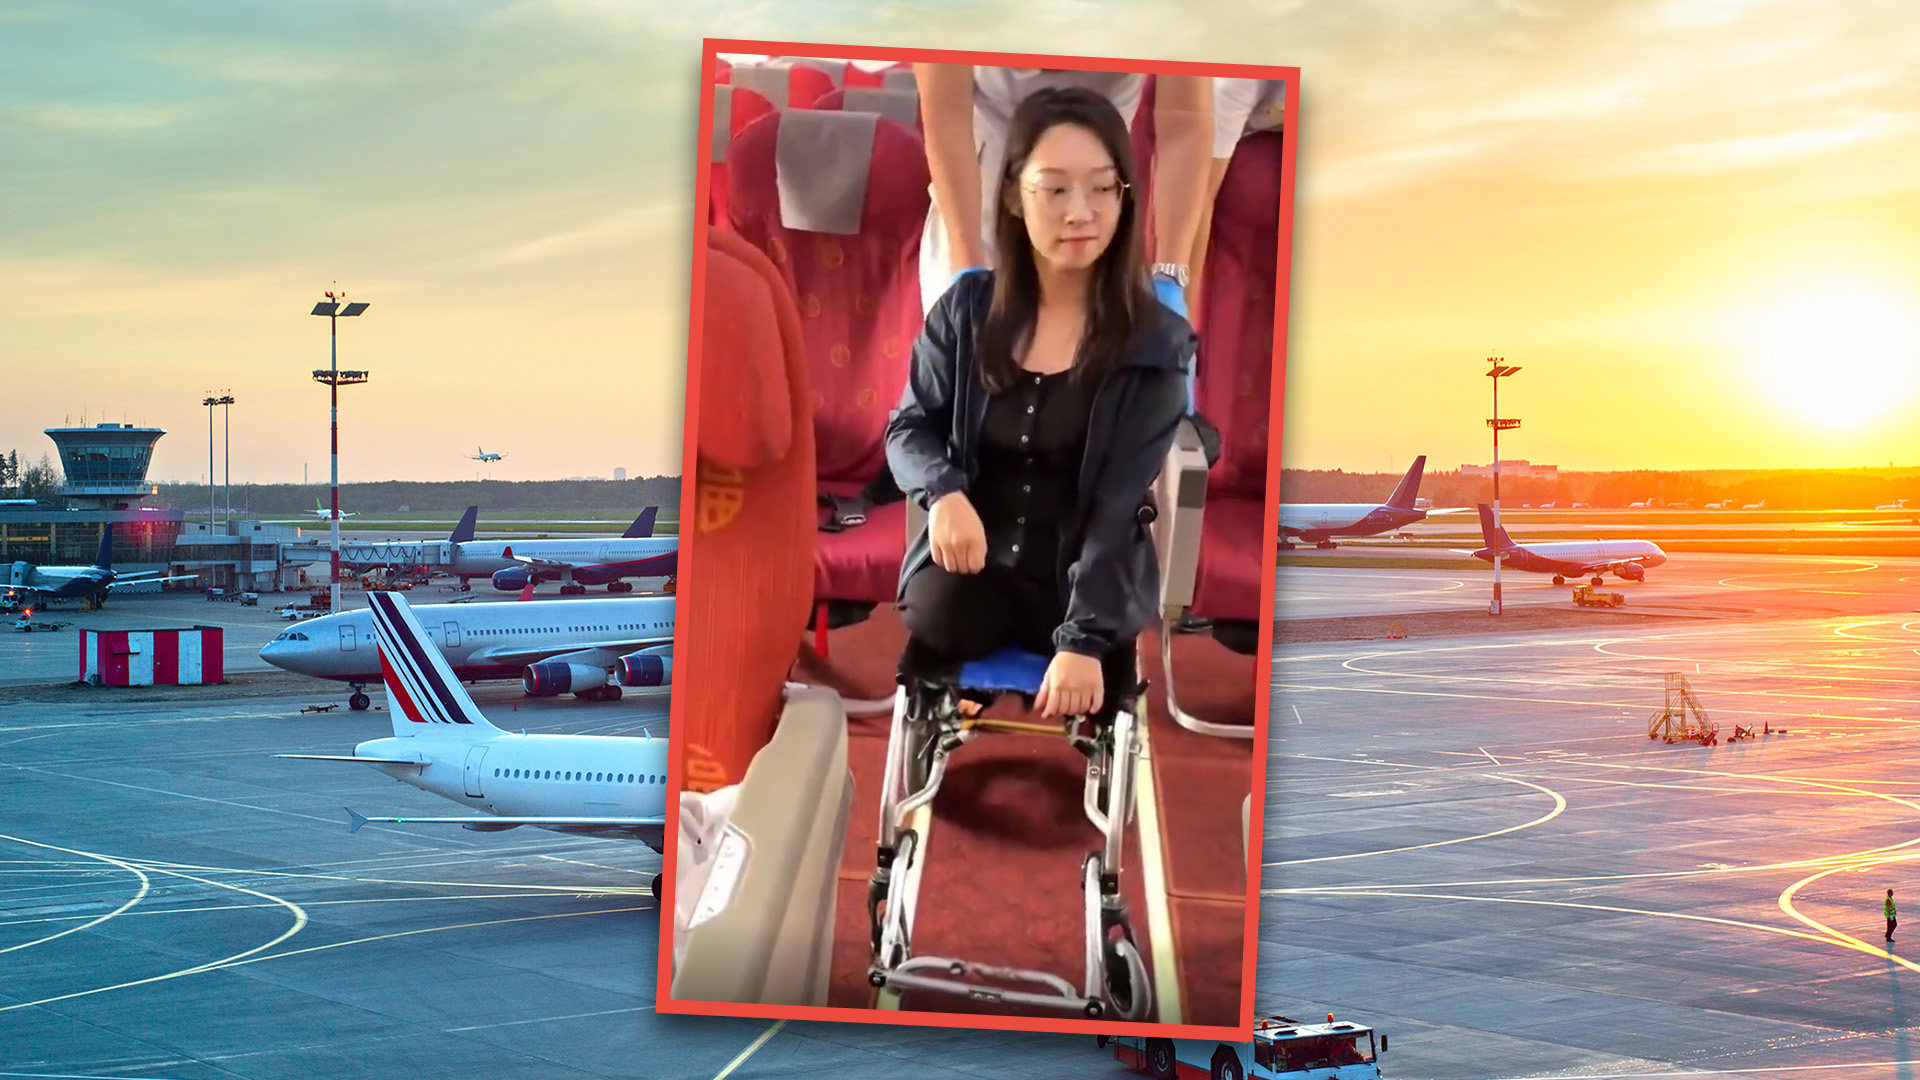 Social media in China has been enraged by the story of a woman with no legs who was barred from boarding a mainland flight with her wheelchair. Photo: SCMP composite/Shutterstock/Weibo